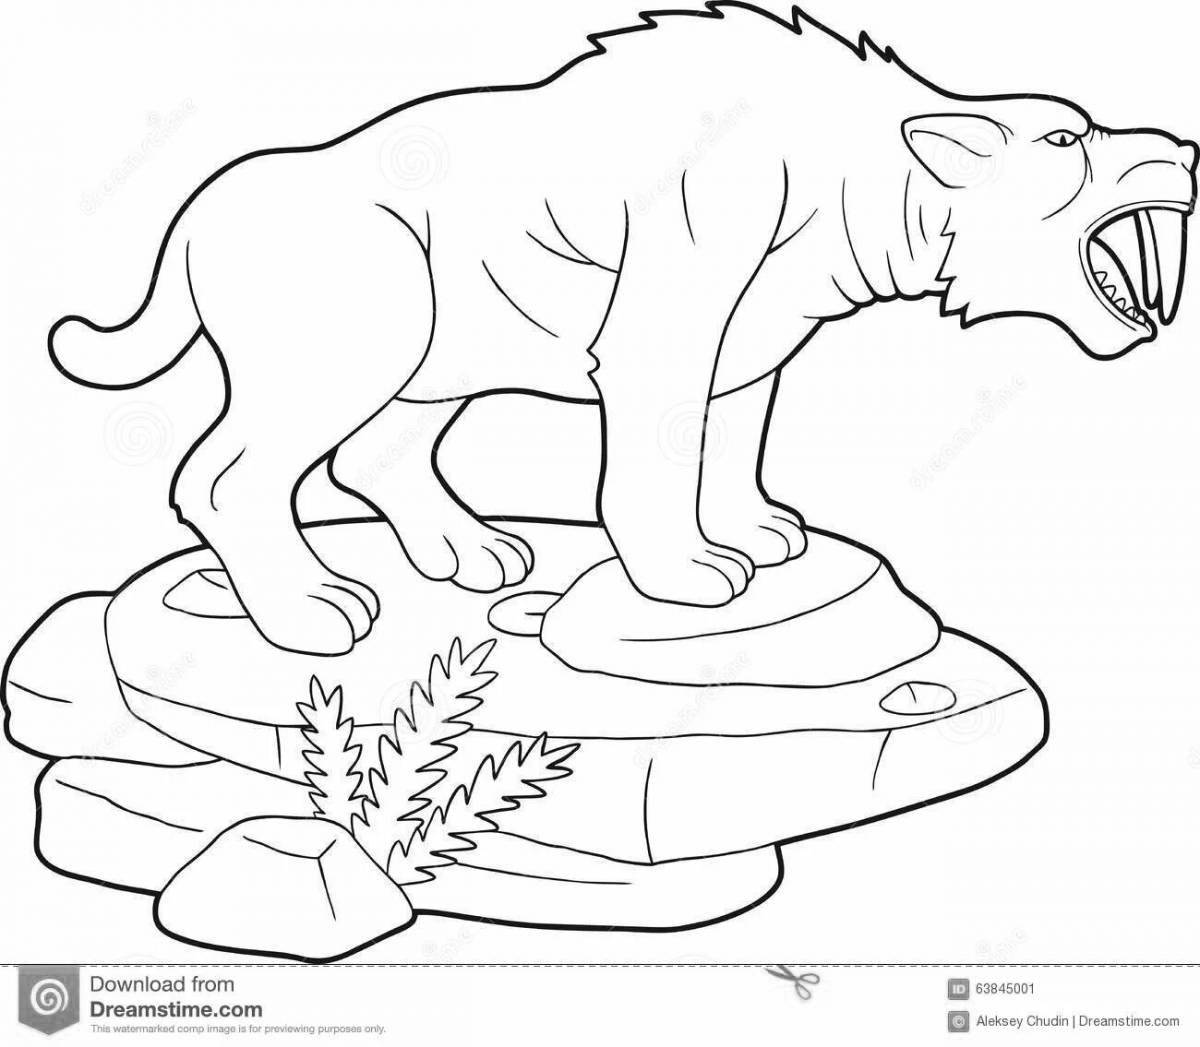 Colorful saber-toothed tiger coloring book for kids